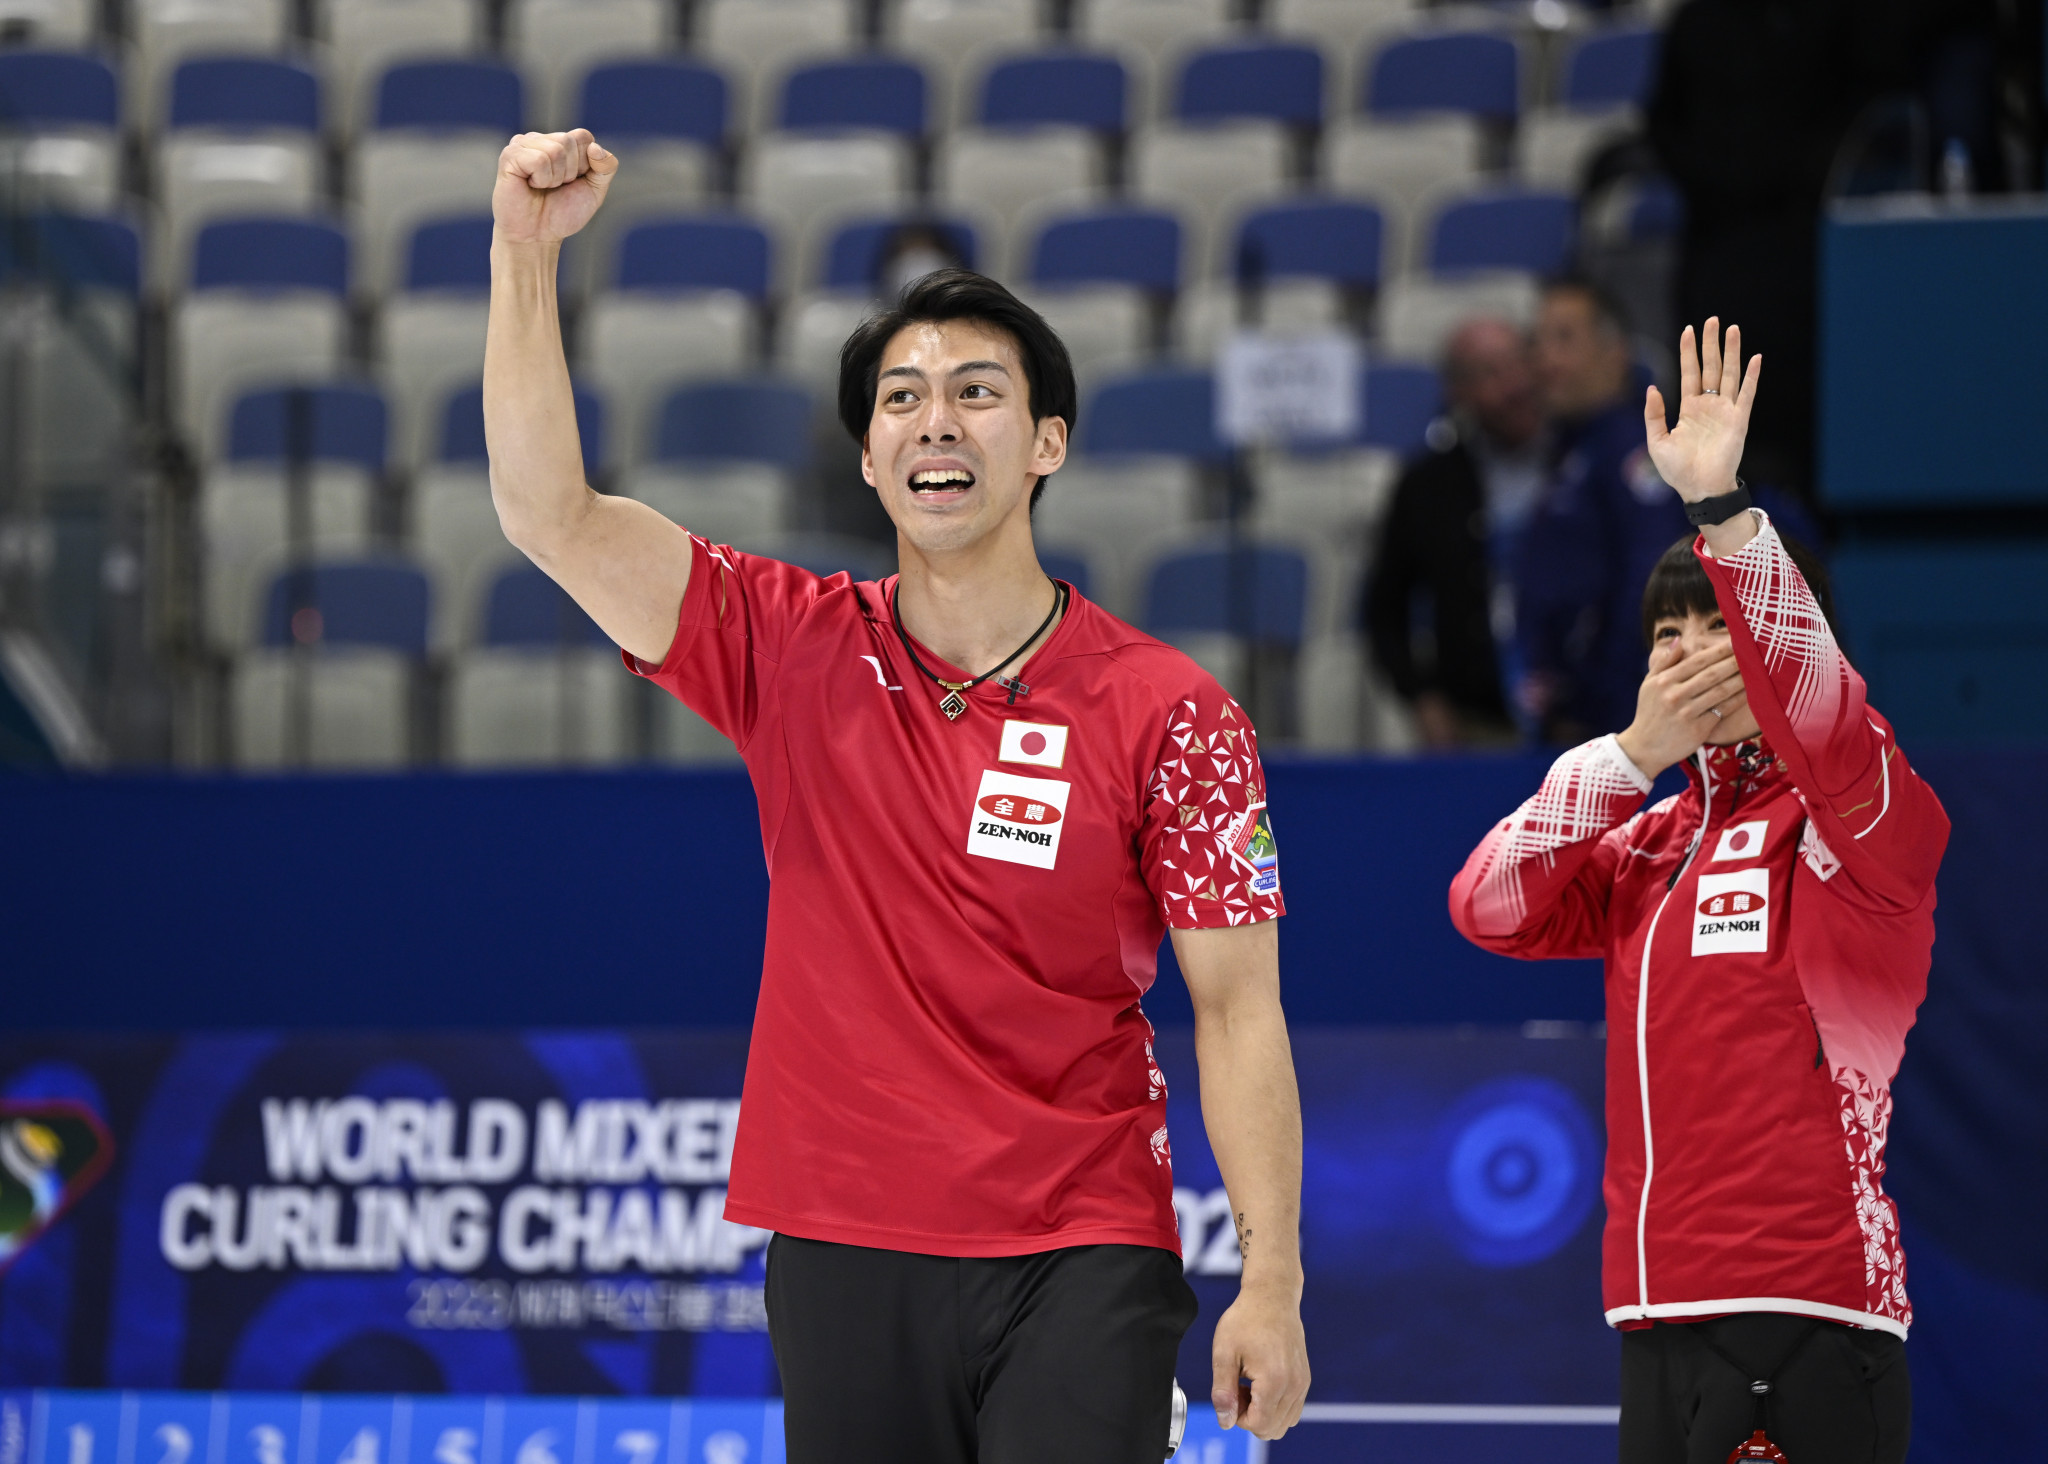 Japan are into the World Mixed Doubles Curling Championship final with a 5-4 win over Norway ©WCF/Eakin Howard